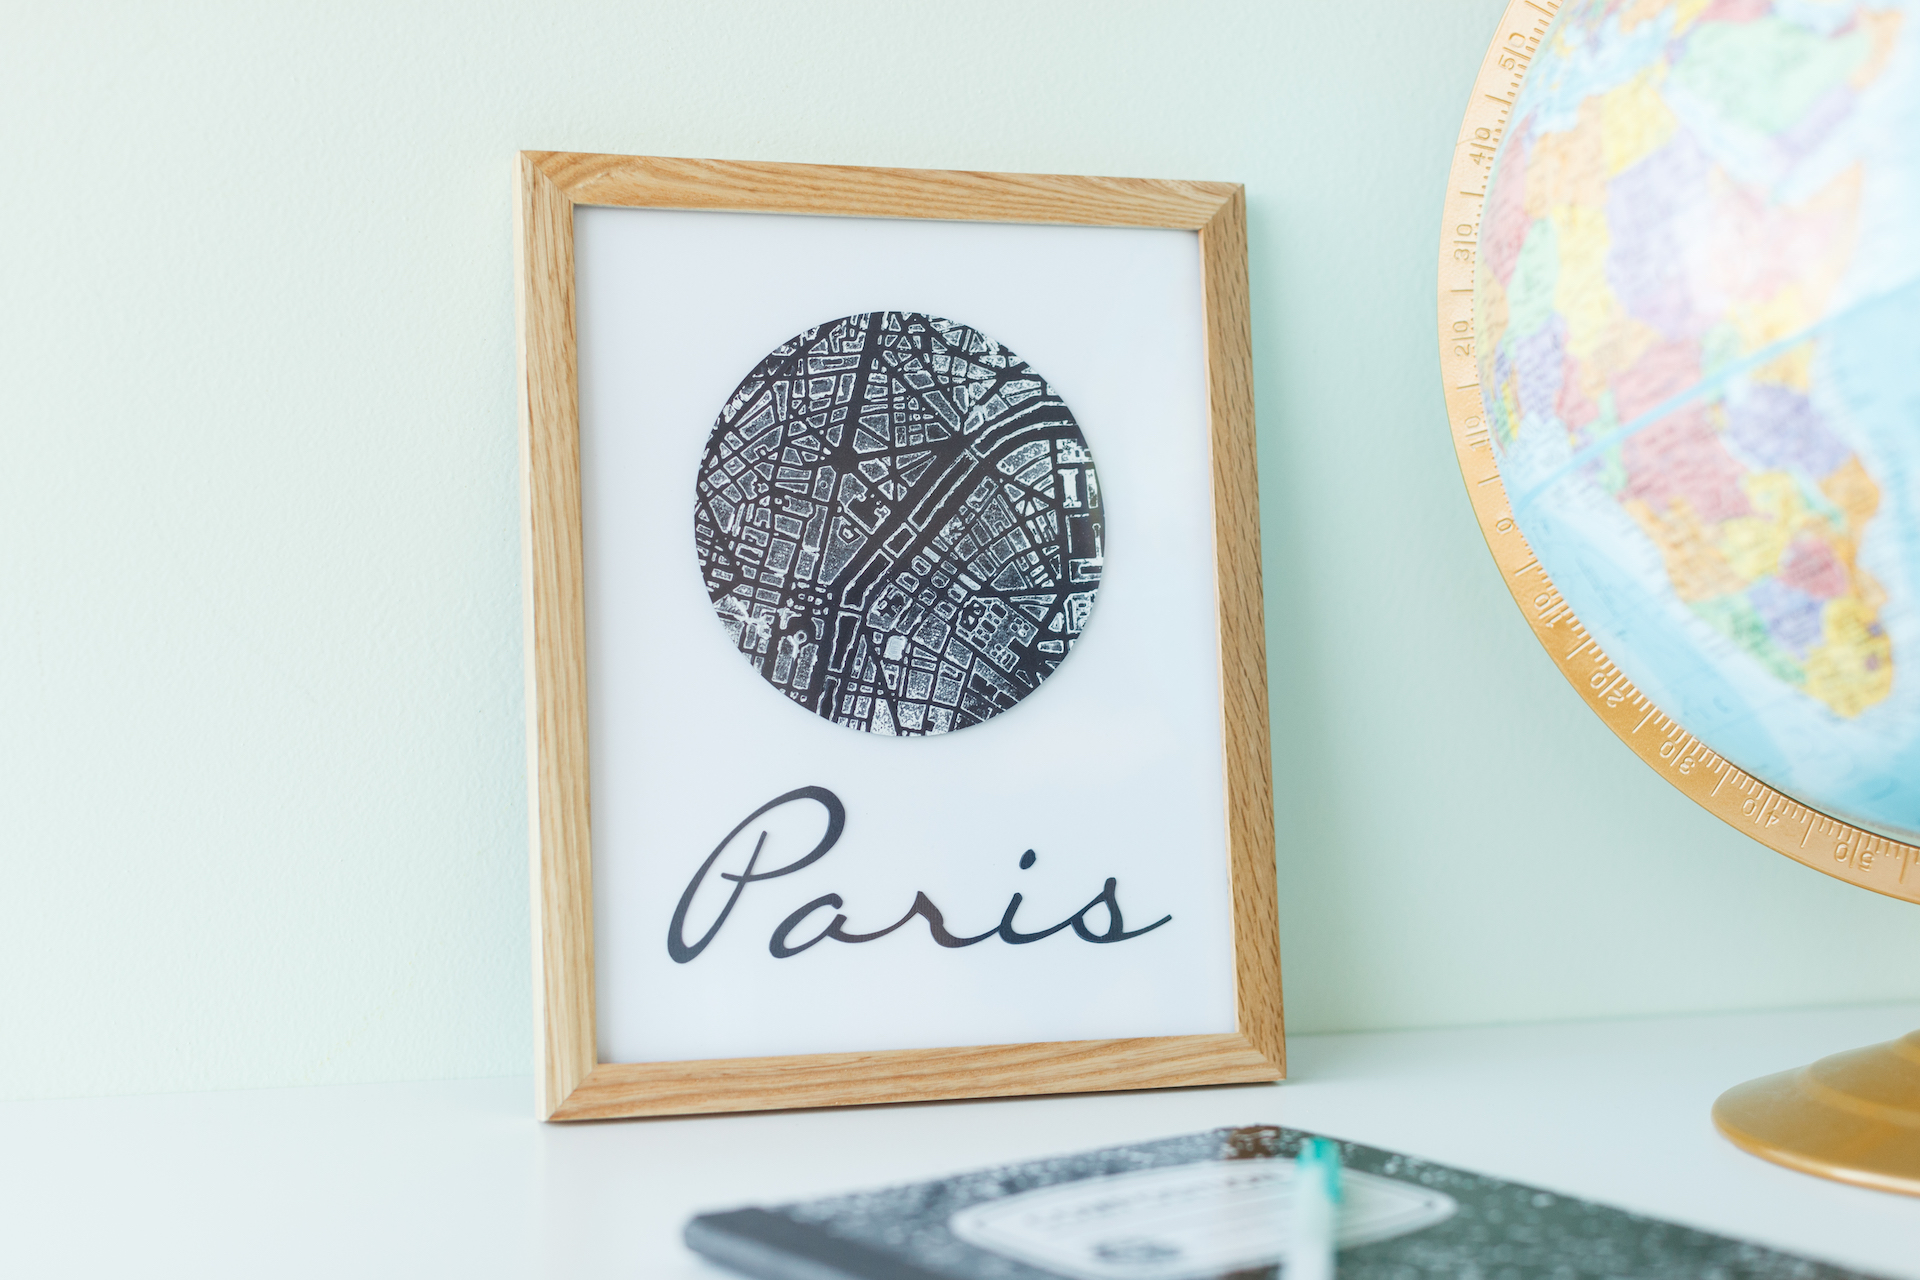 How to Make Wall Art with the Cricut Maker 3 - Michelle's Party Plan-It